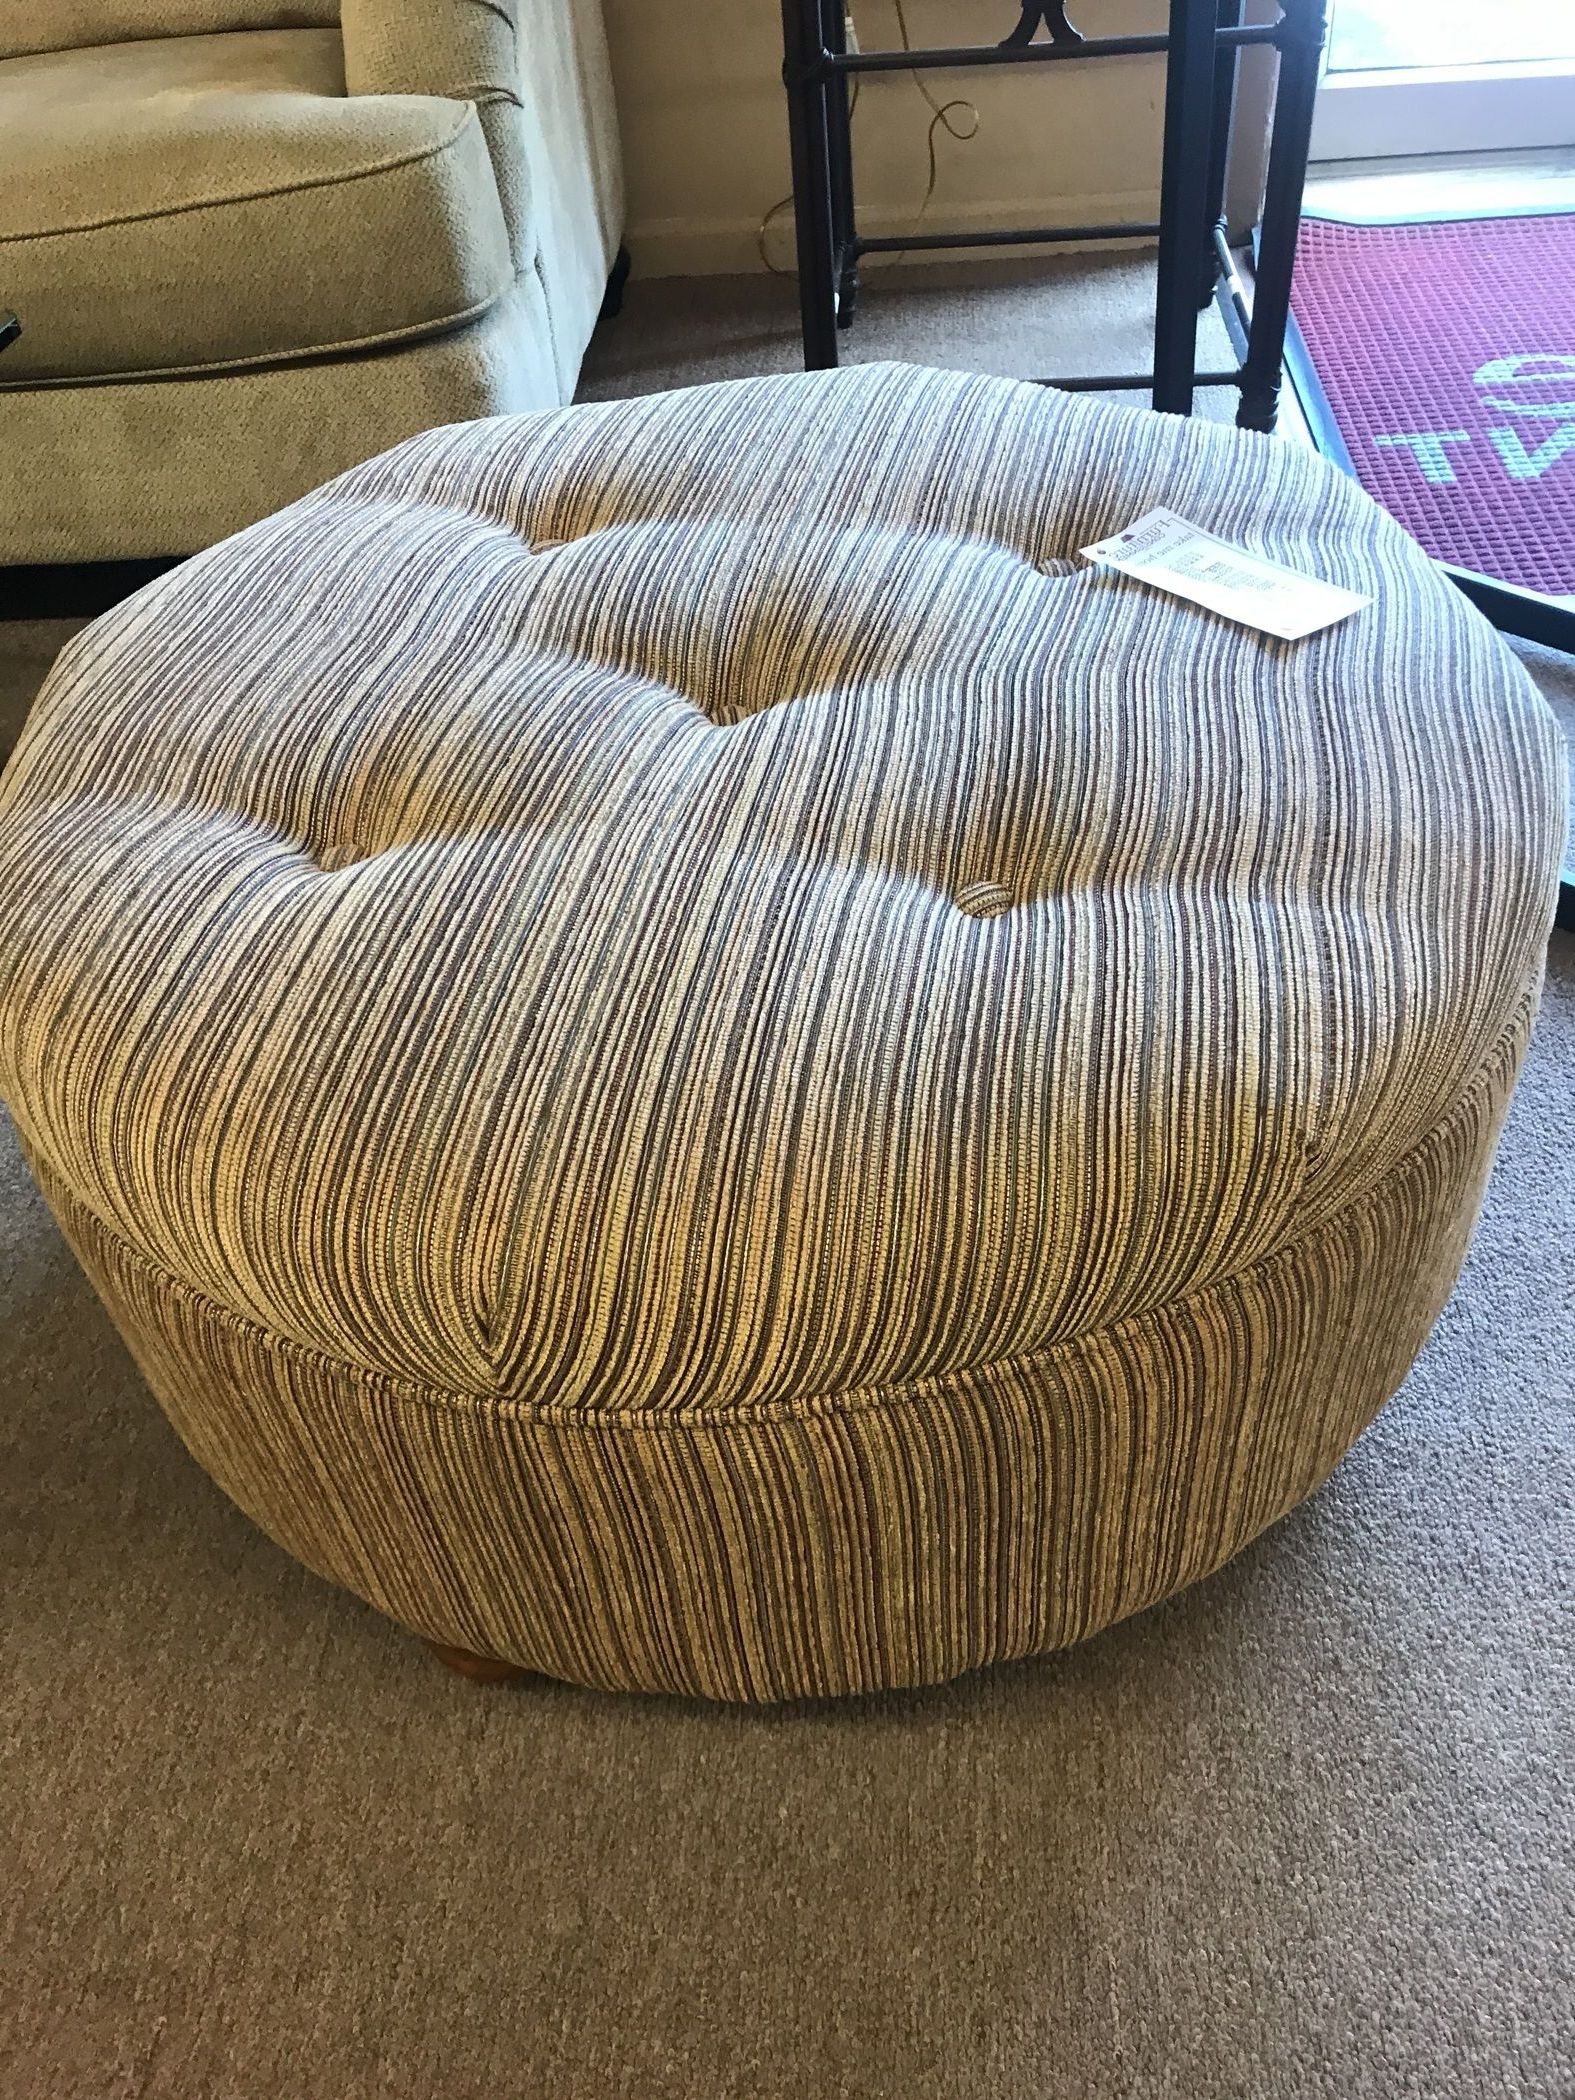 Most Popular Tufted Fabric Ottomans Within Tufted Round Fabric Ottoman (View 4 of 10)